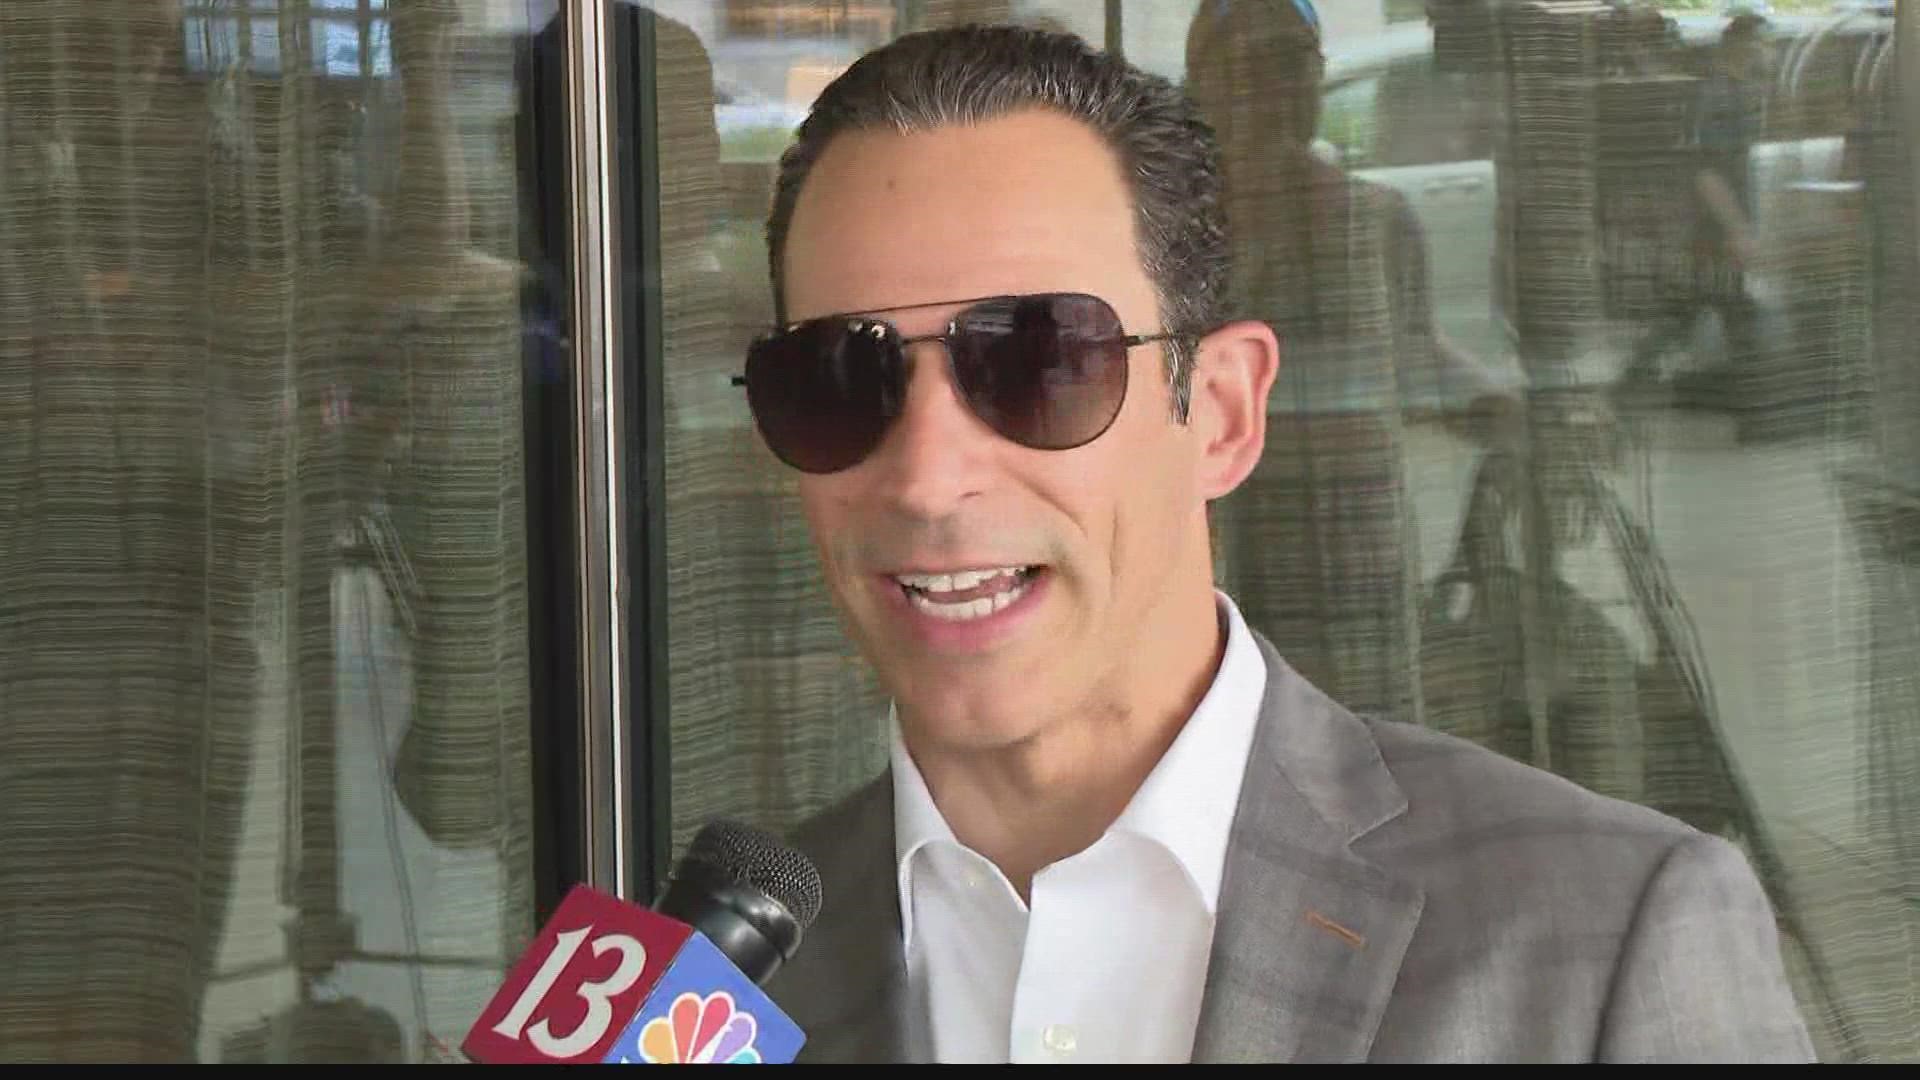 Helio Castroneves looks back on his seventh place finish in the Indianapolis 500 and looks to the future.